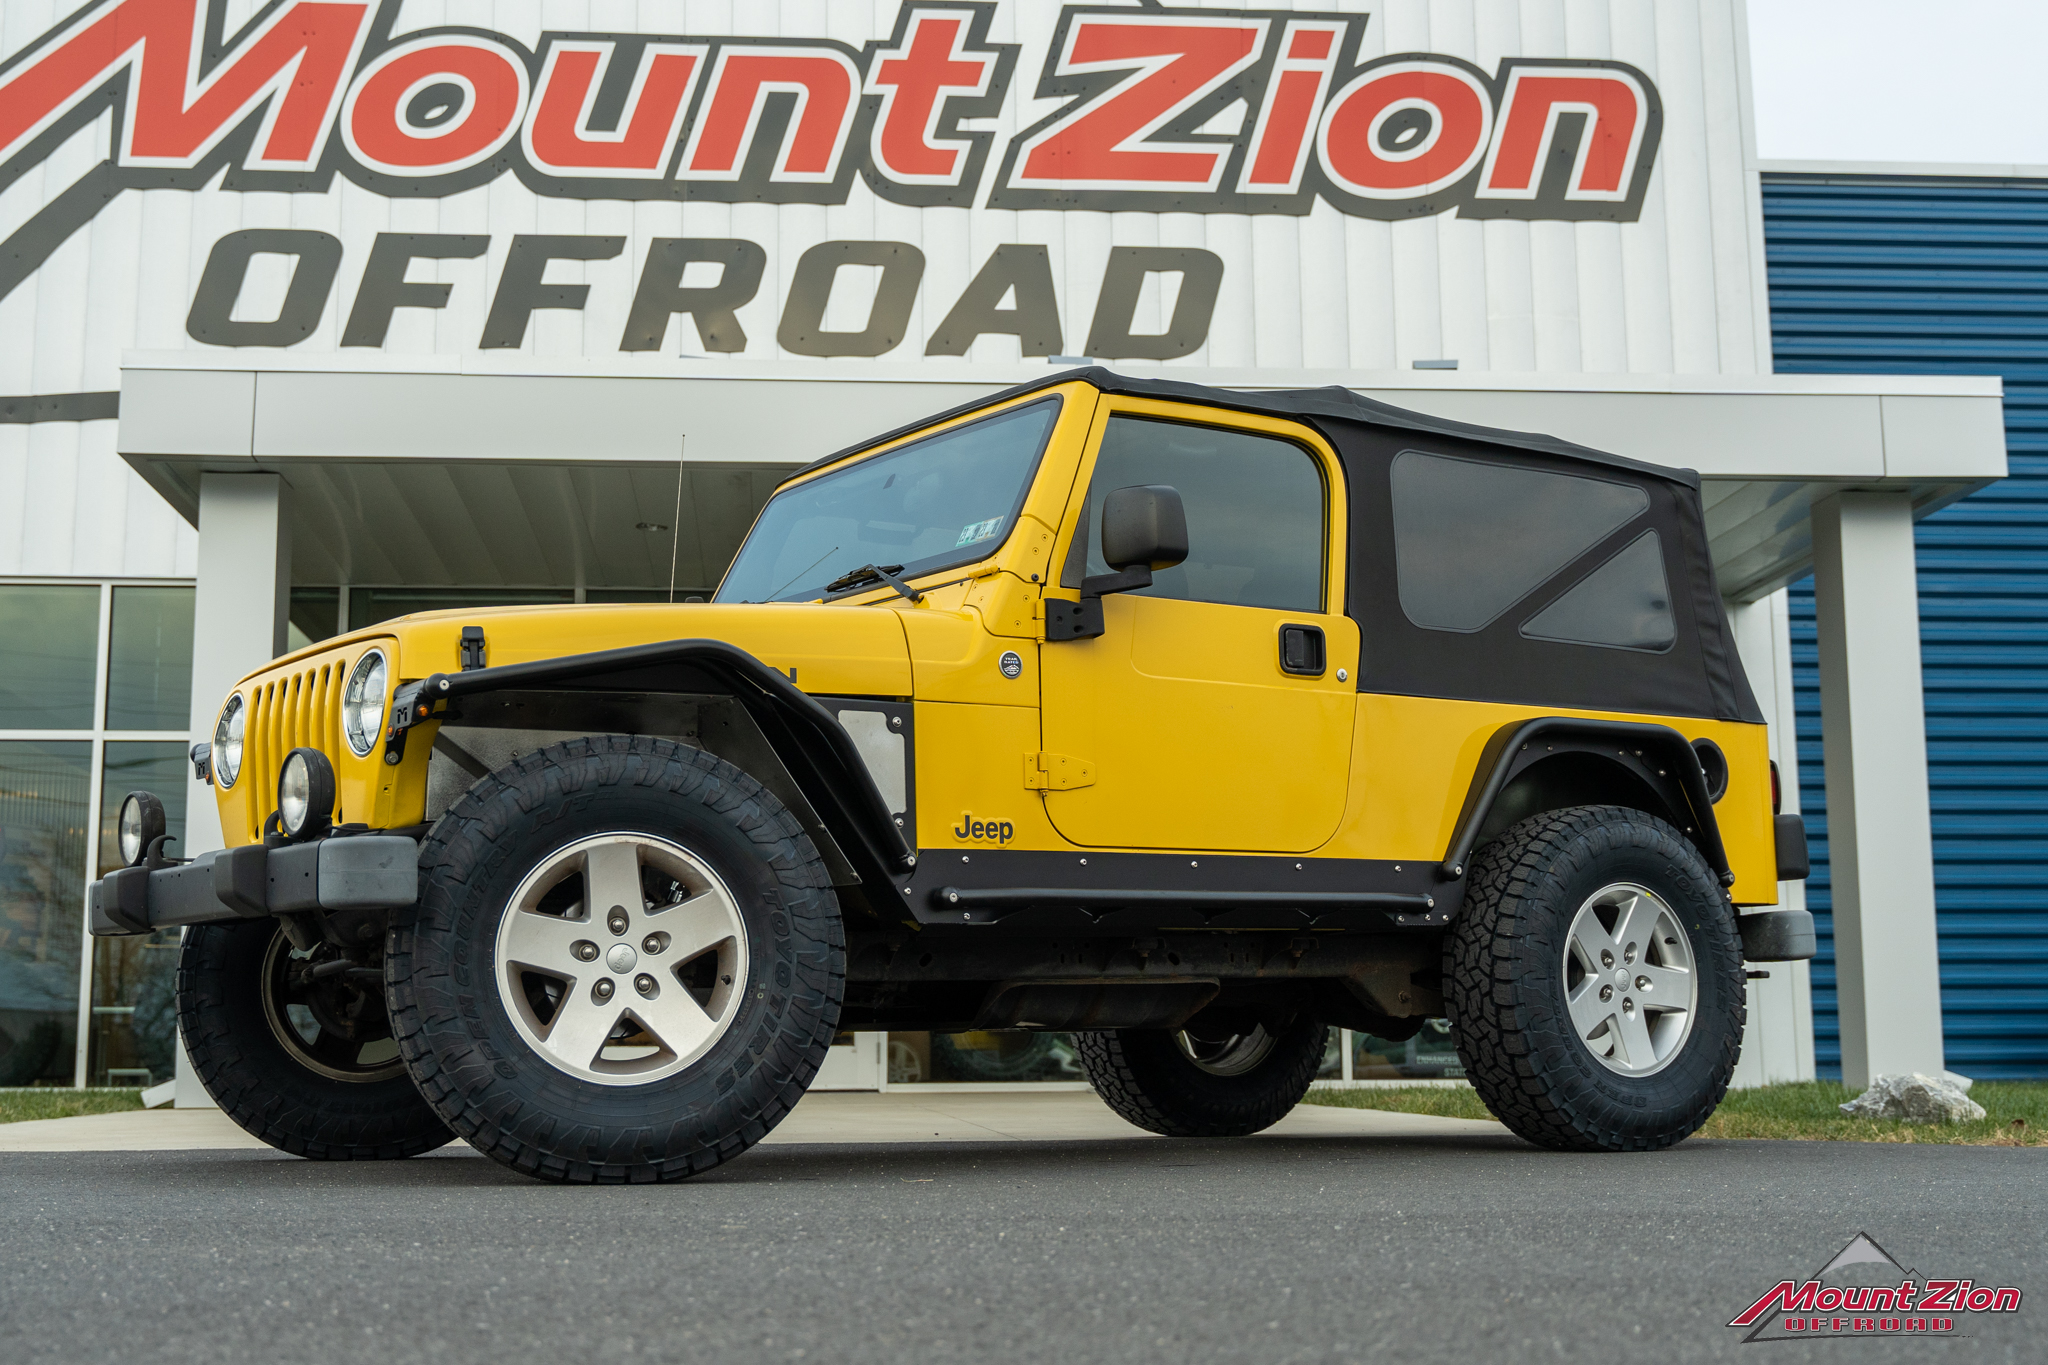 2006 Jeep Wrangler Unlimited Solar Yellow - Mount Zion Offroad